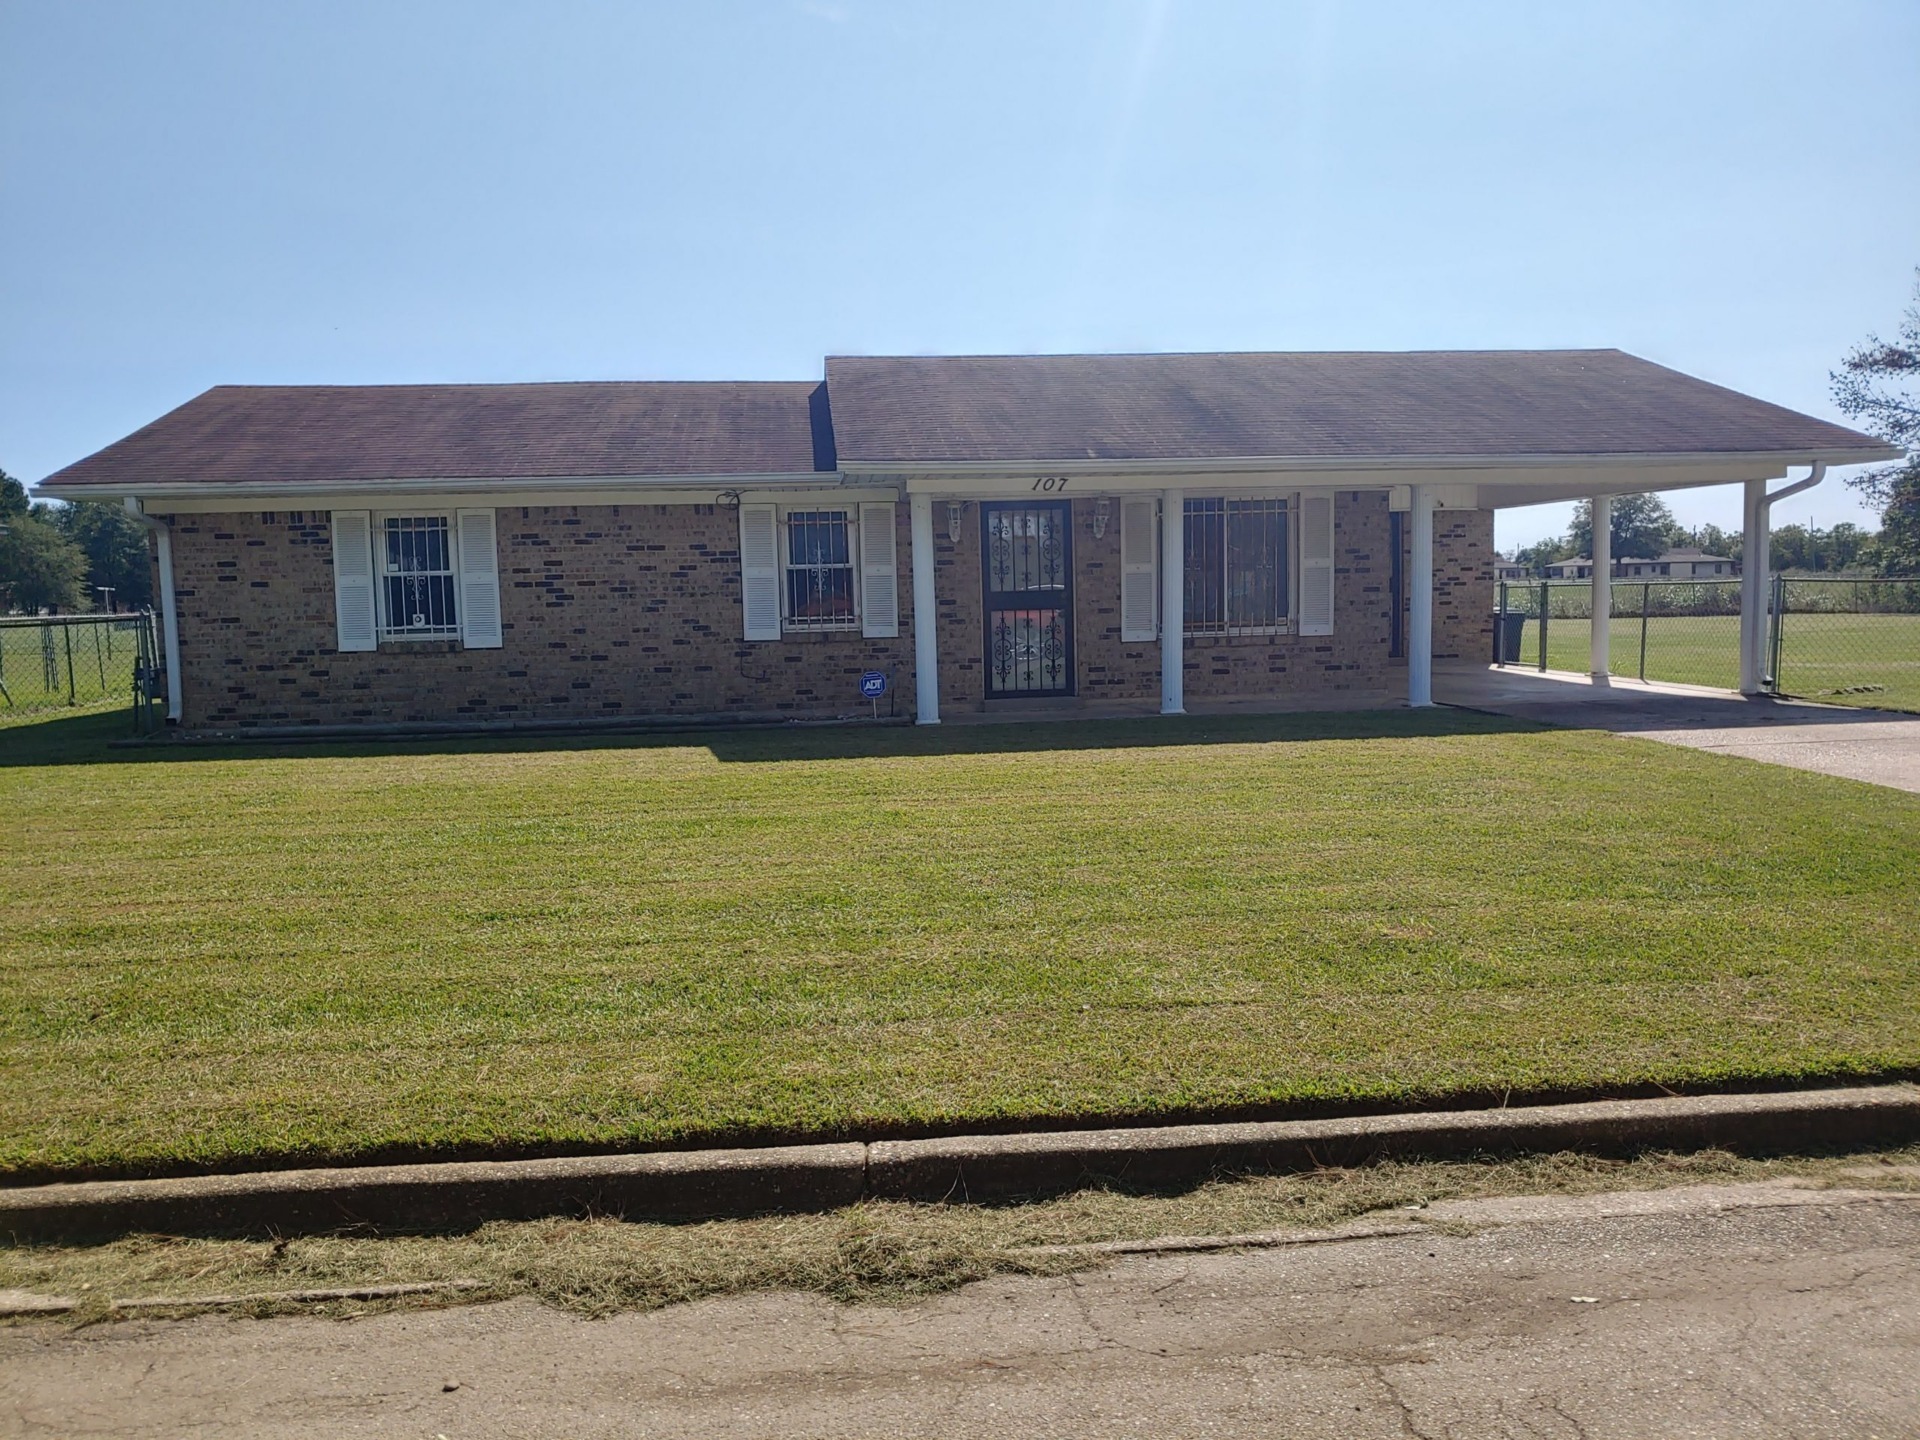 You are currently viewing 107 Driftwood, McGehee, AR 71654